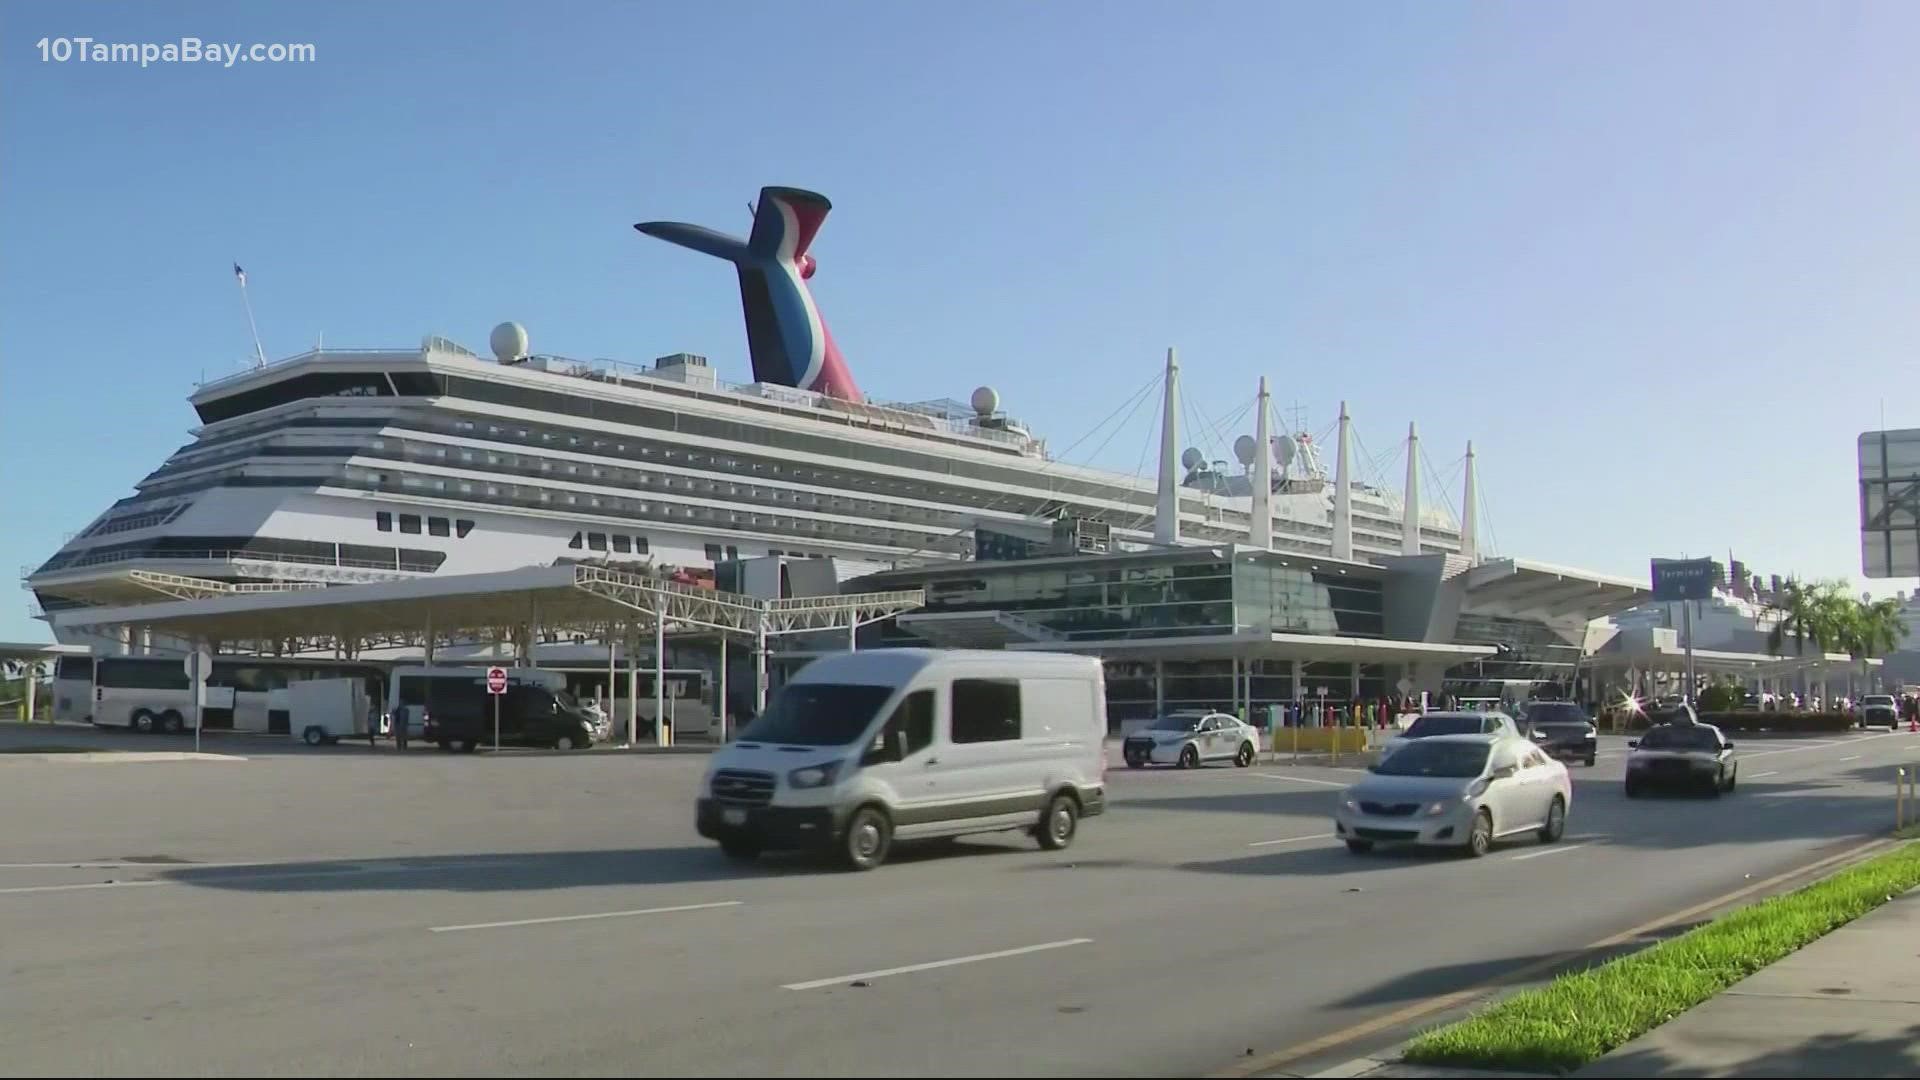 The ship has 2,497 passengers and 1,112 crew members and was scheduled to return to Miami on Sunday following an 8-day cruise.